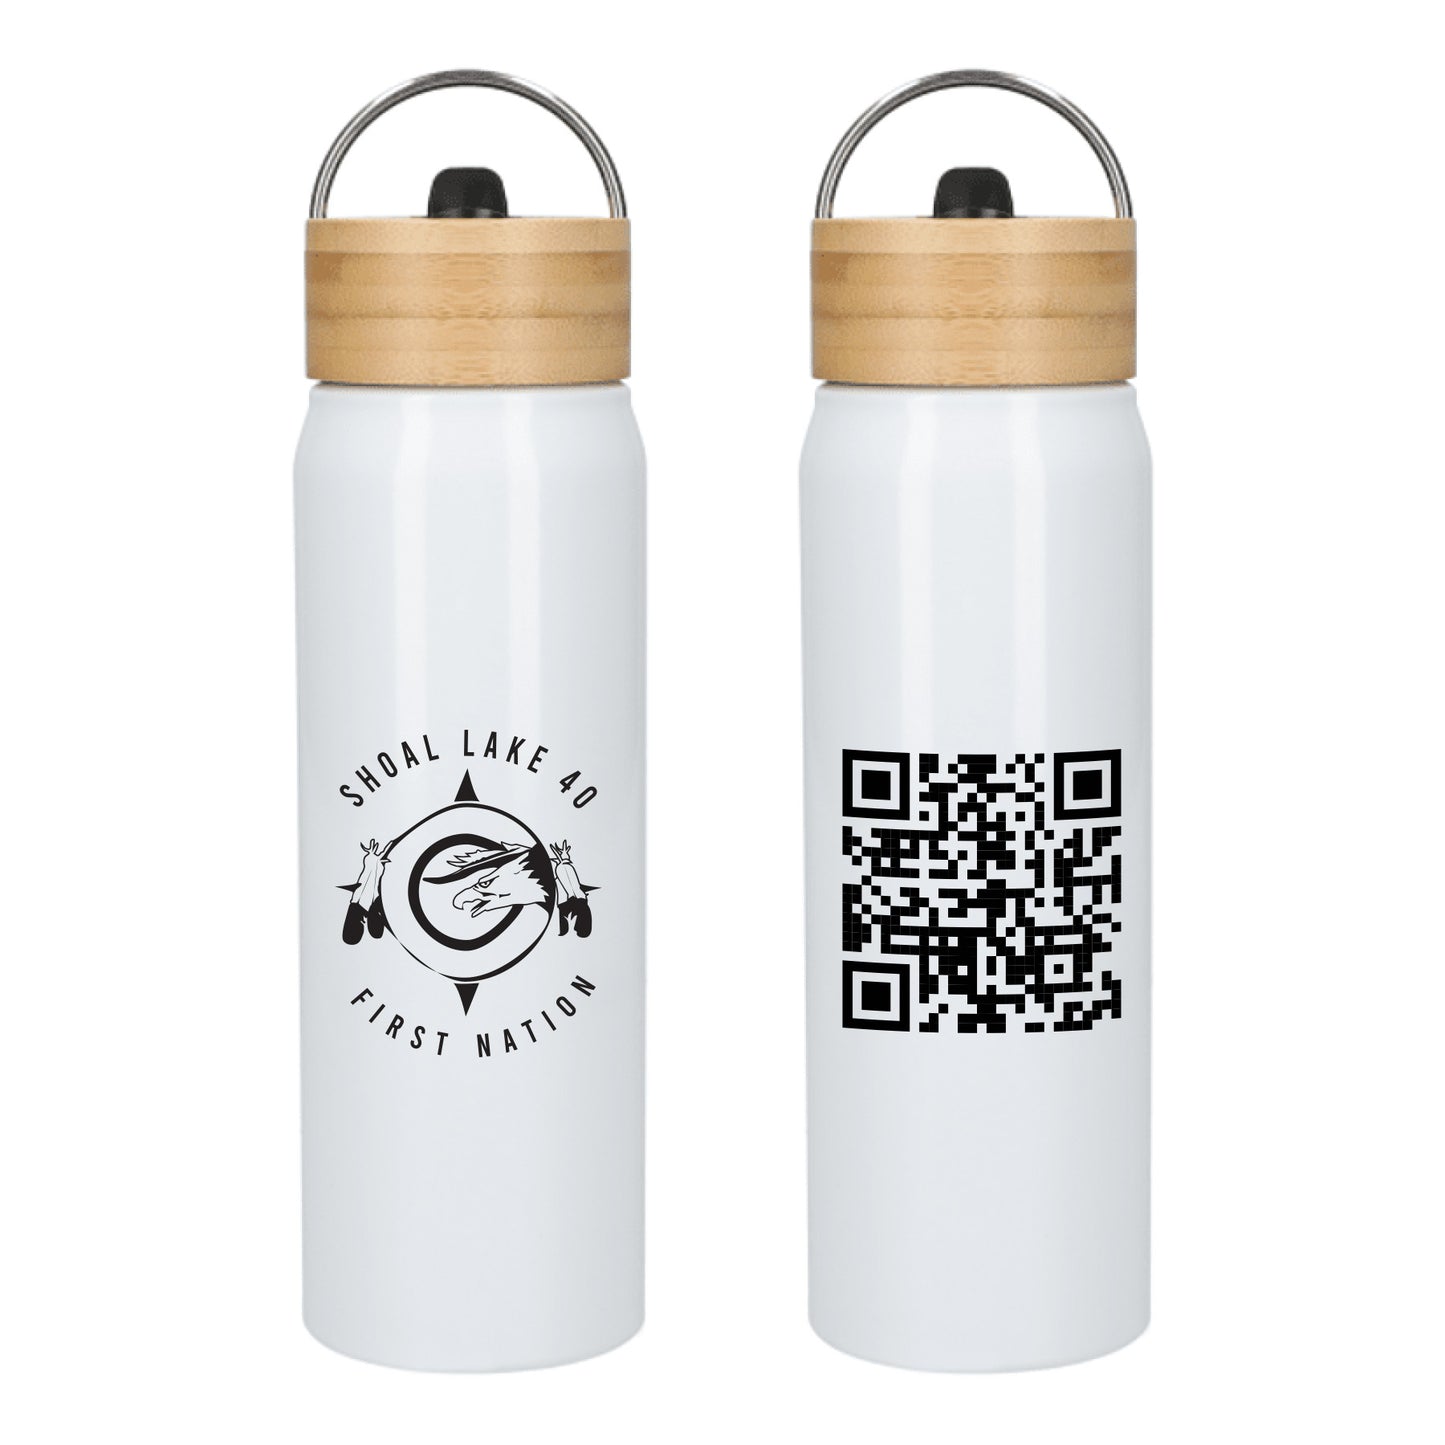 Eco Friendly Water Bottles - Support Shoal Lake 40's Future Leaders